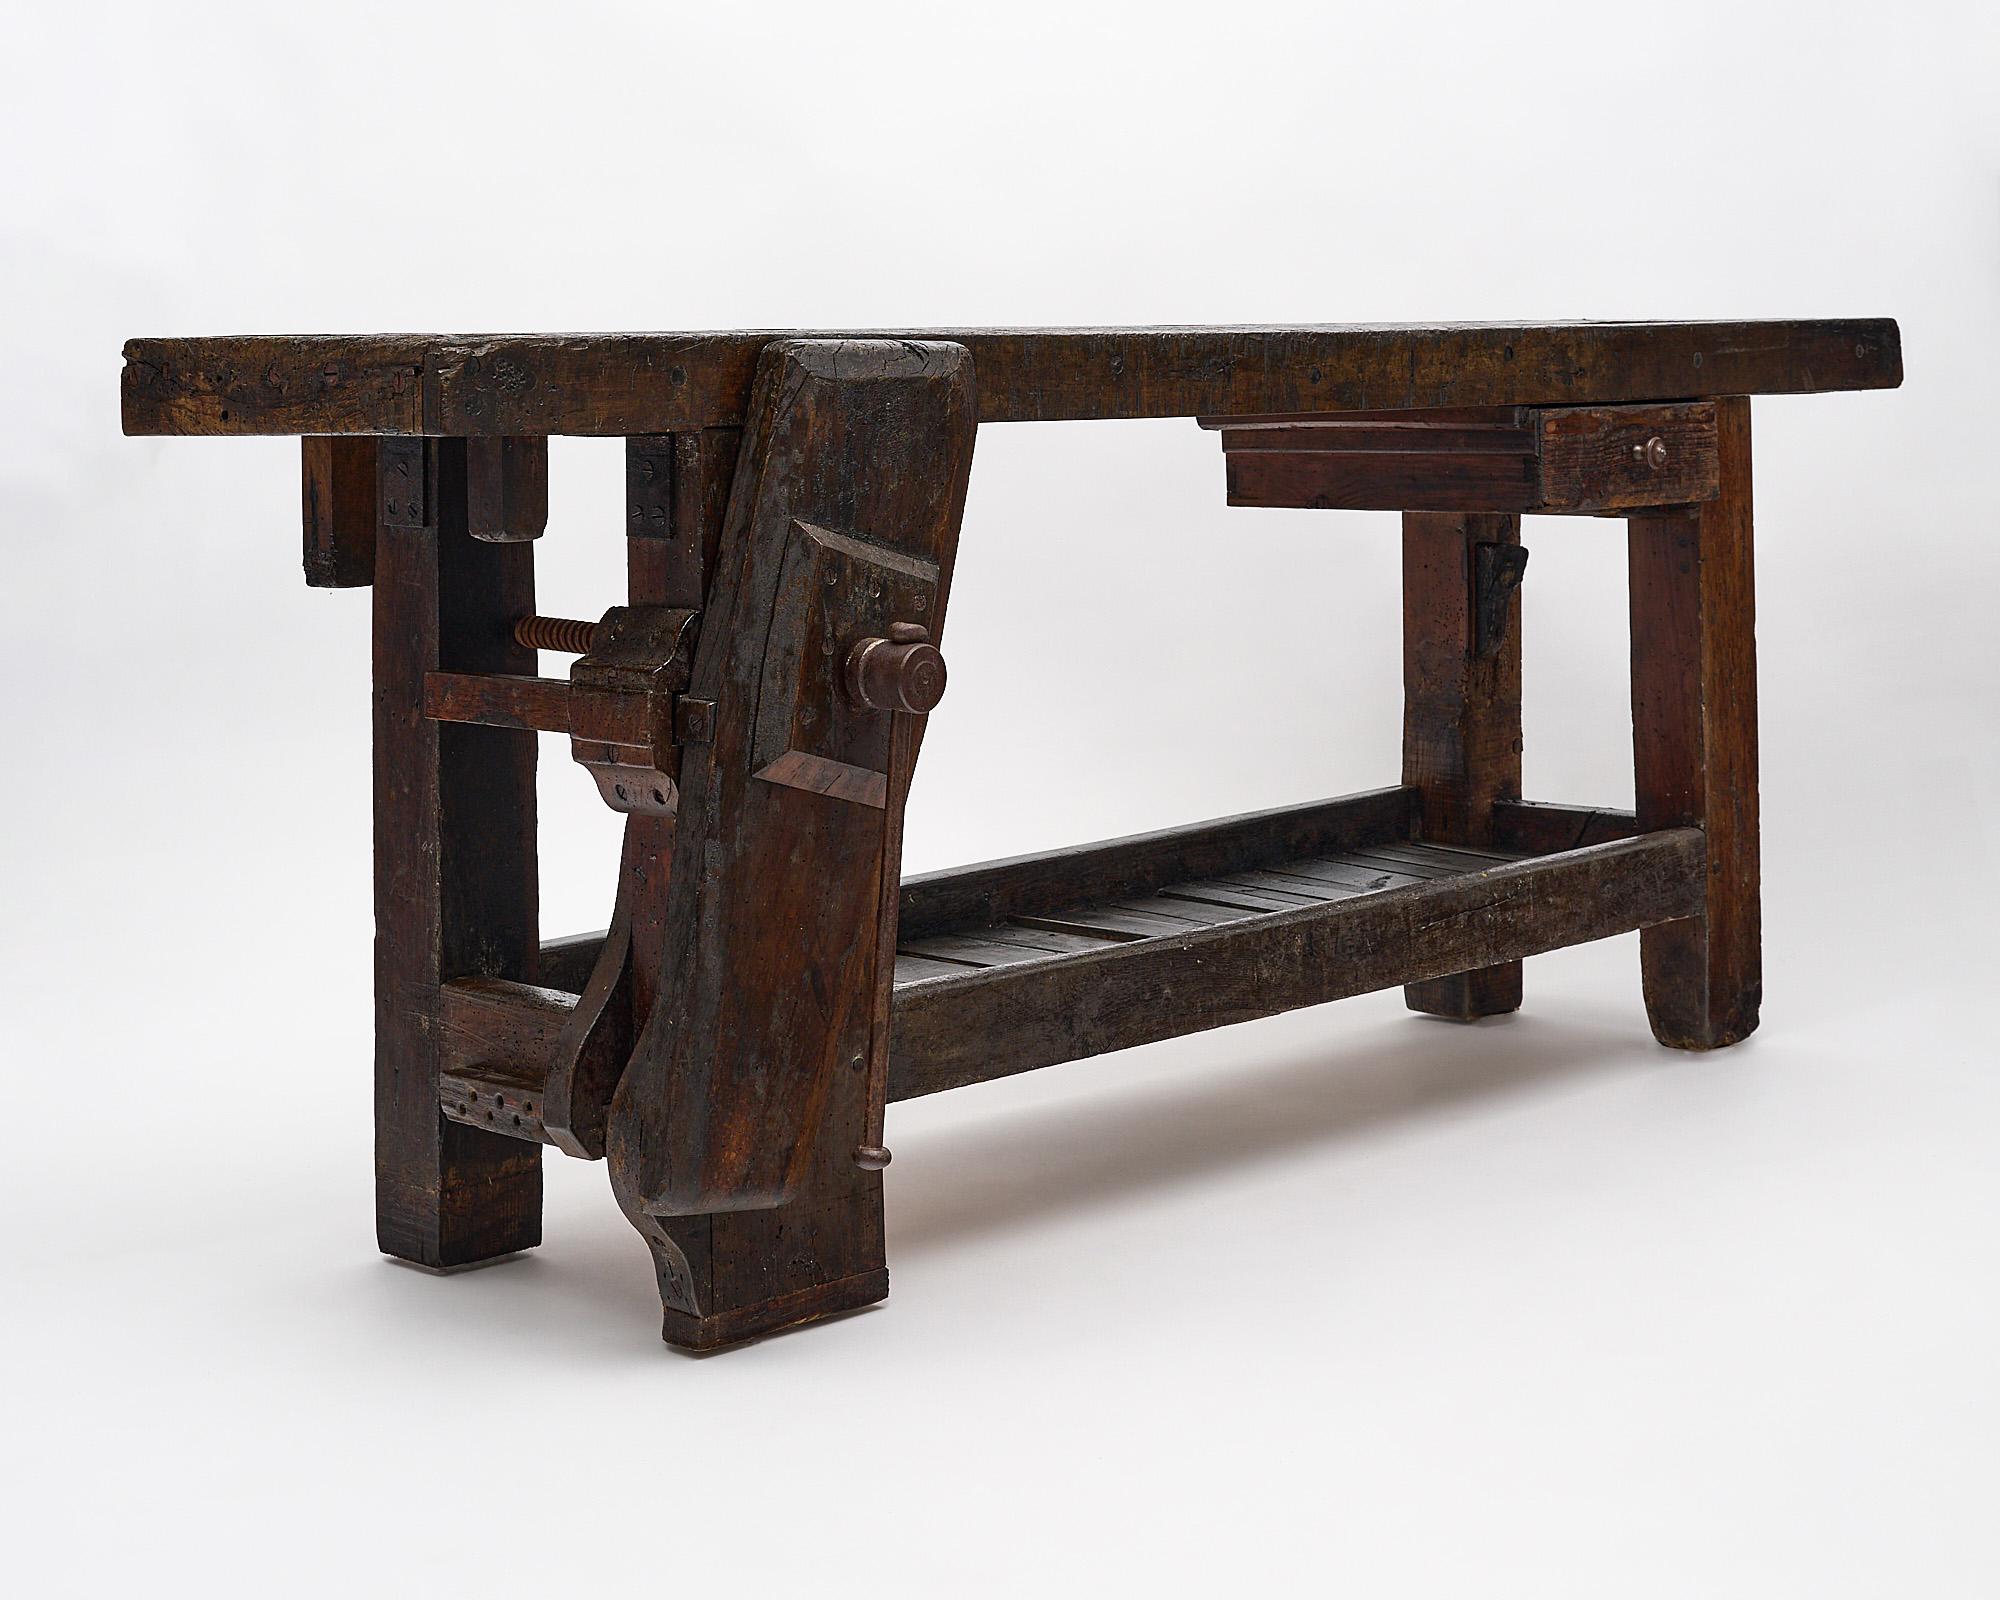 Carpenter’s work bench, French, made of waxed beech wood from the French Alps. This industrial “etabli” features its original vise and drawer. The depth listed includes the vise, the depth of the table top is 17”.